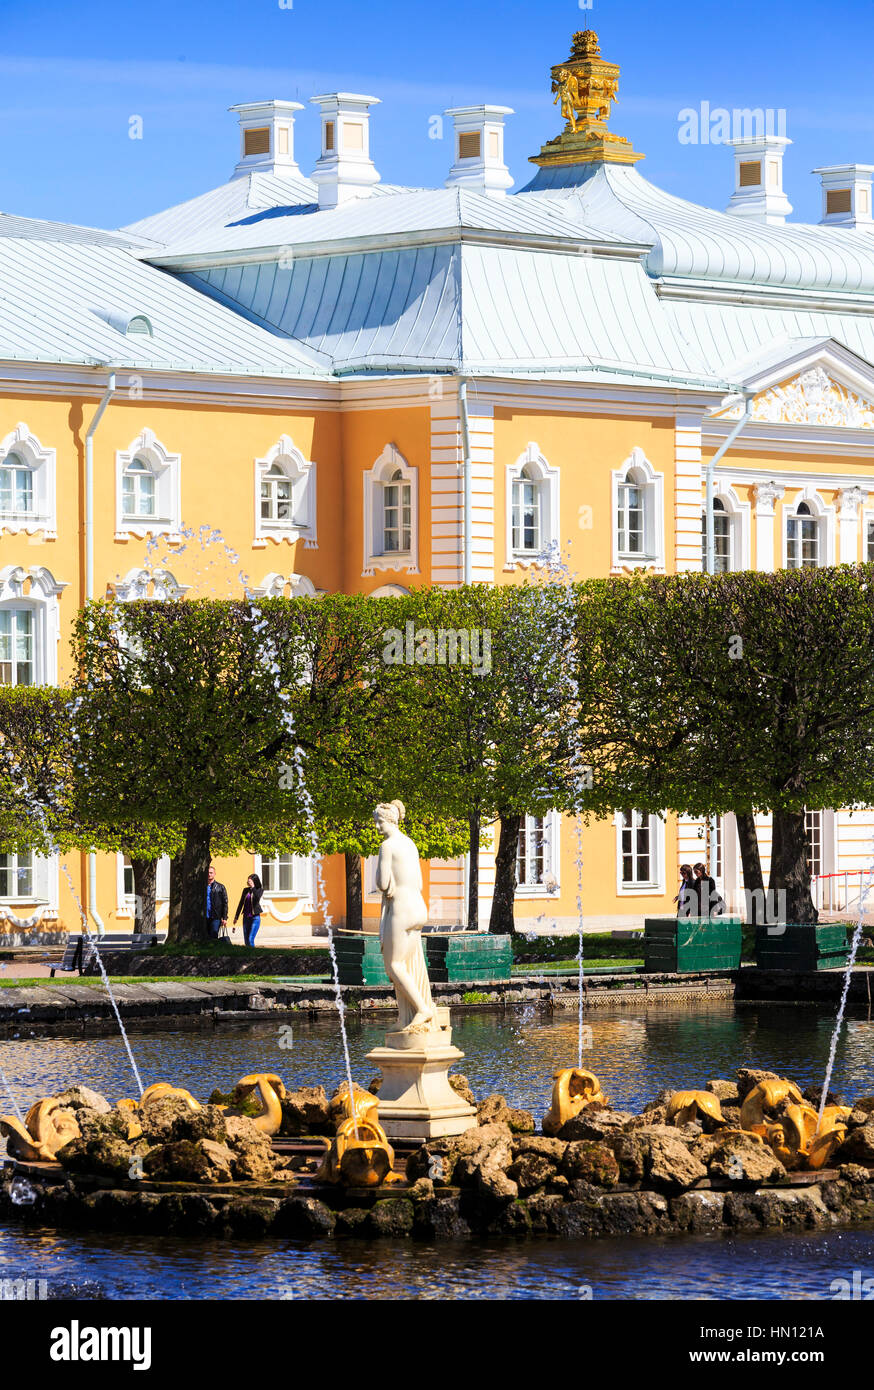 fountains and statue, grand palace, peterhof,St Petersburg, Russia Stock Photo